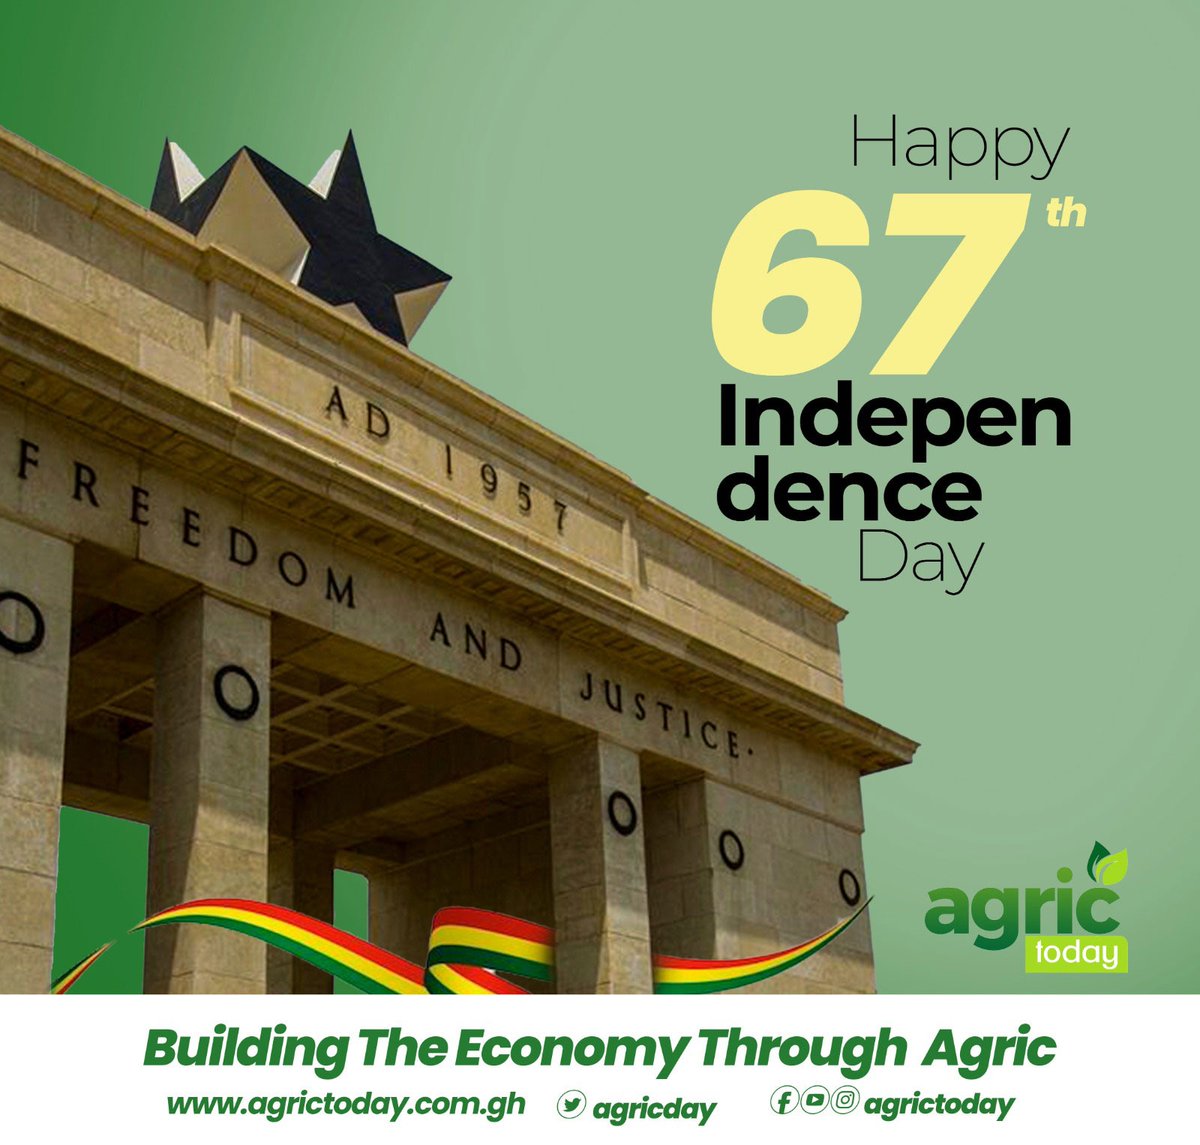 #Ghana was born 67 years ago, and #AgricToday wants to say AYEKOO. #HappyIndependenceDay to #GHANA.